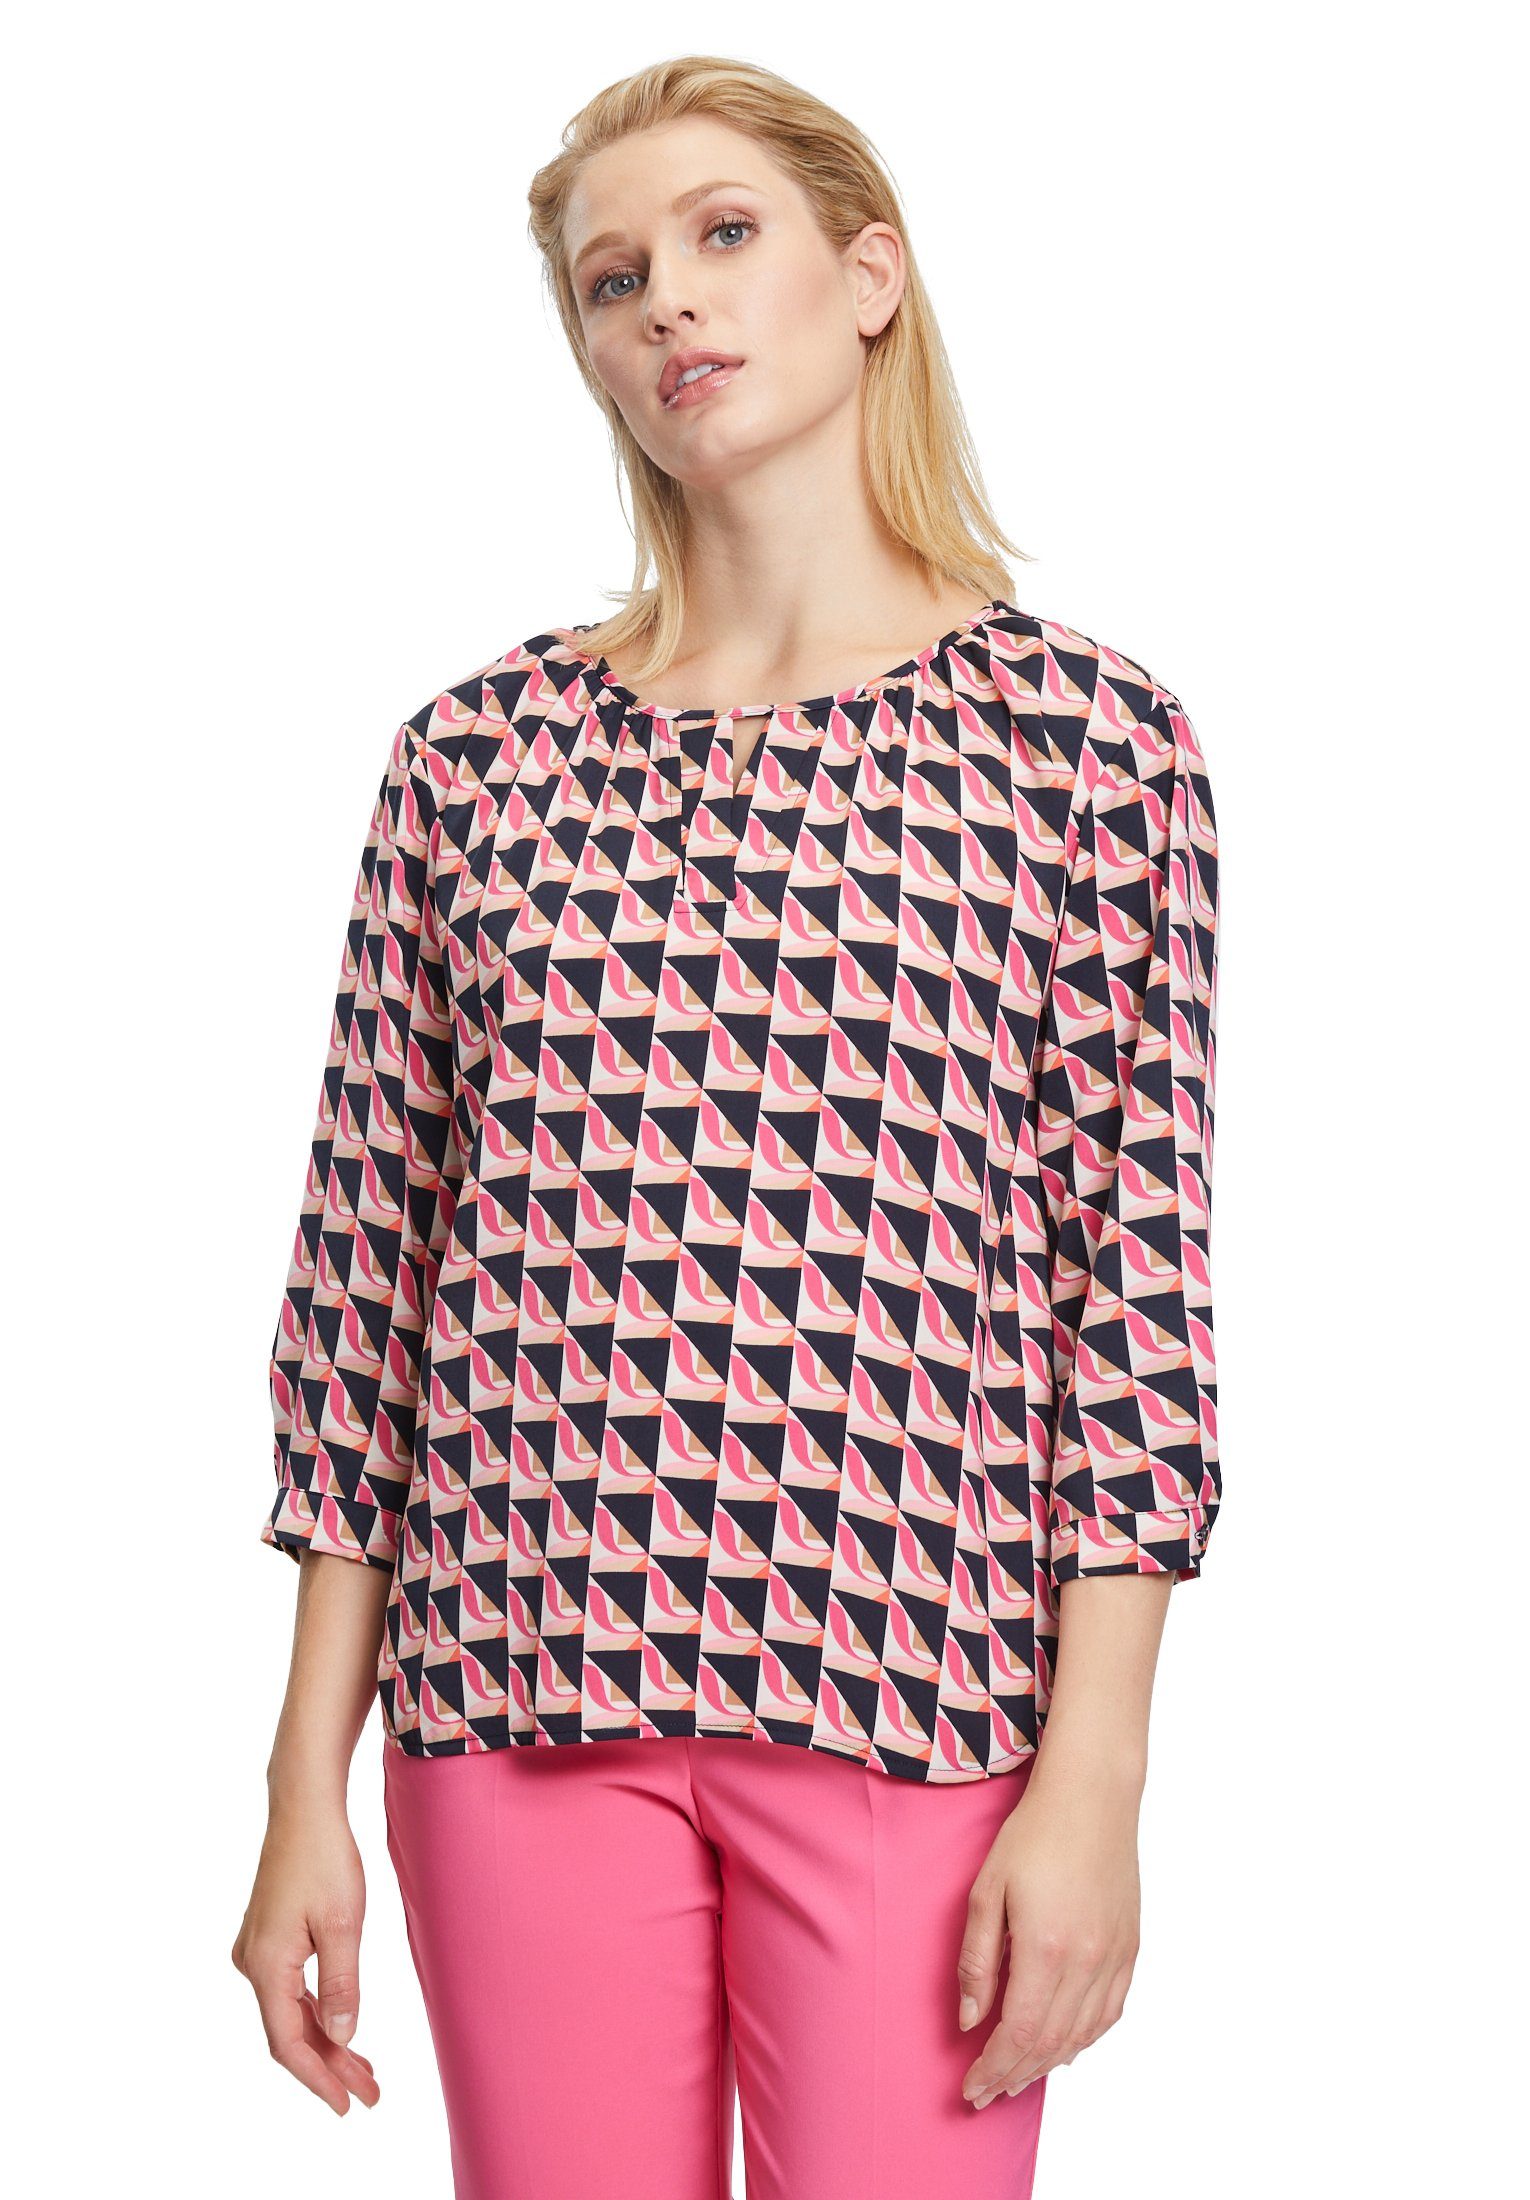 mit Muster Bluse Rosa Klassische Barclay Betty Muster